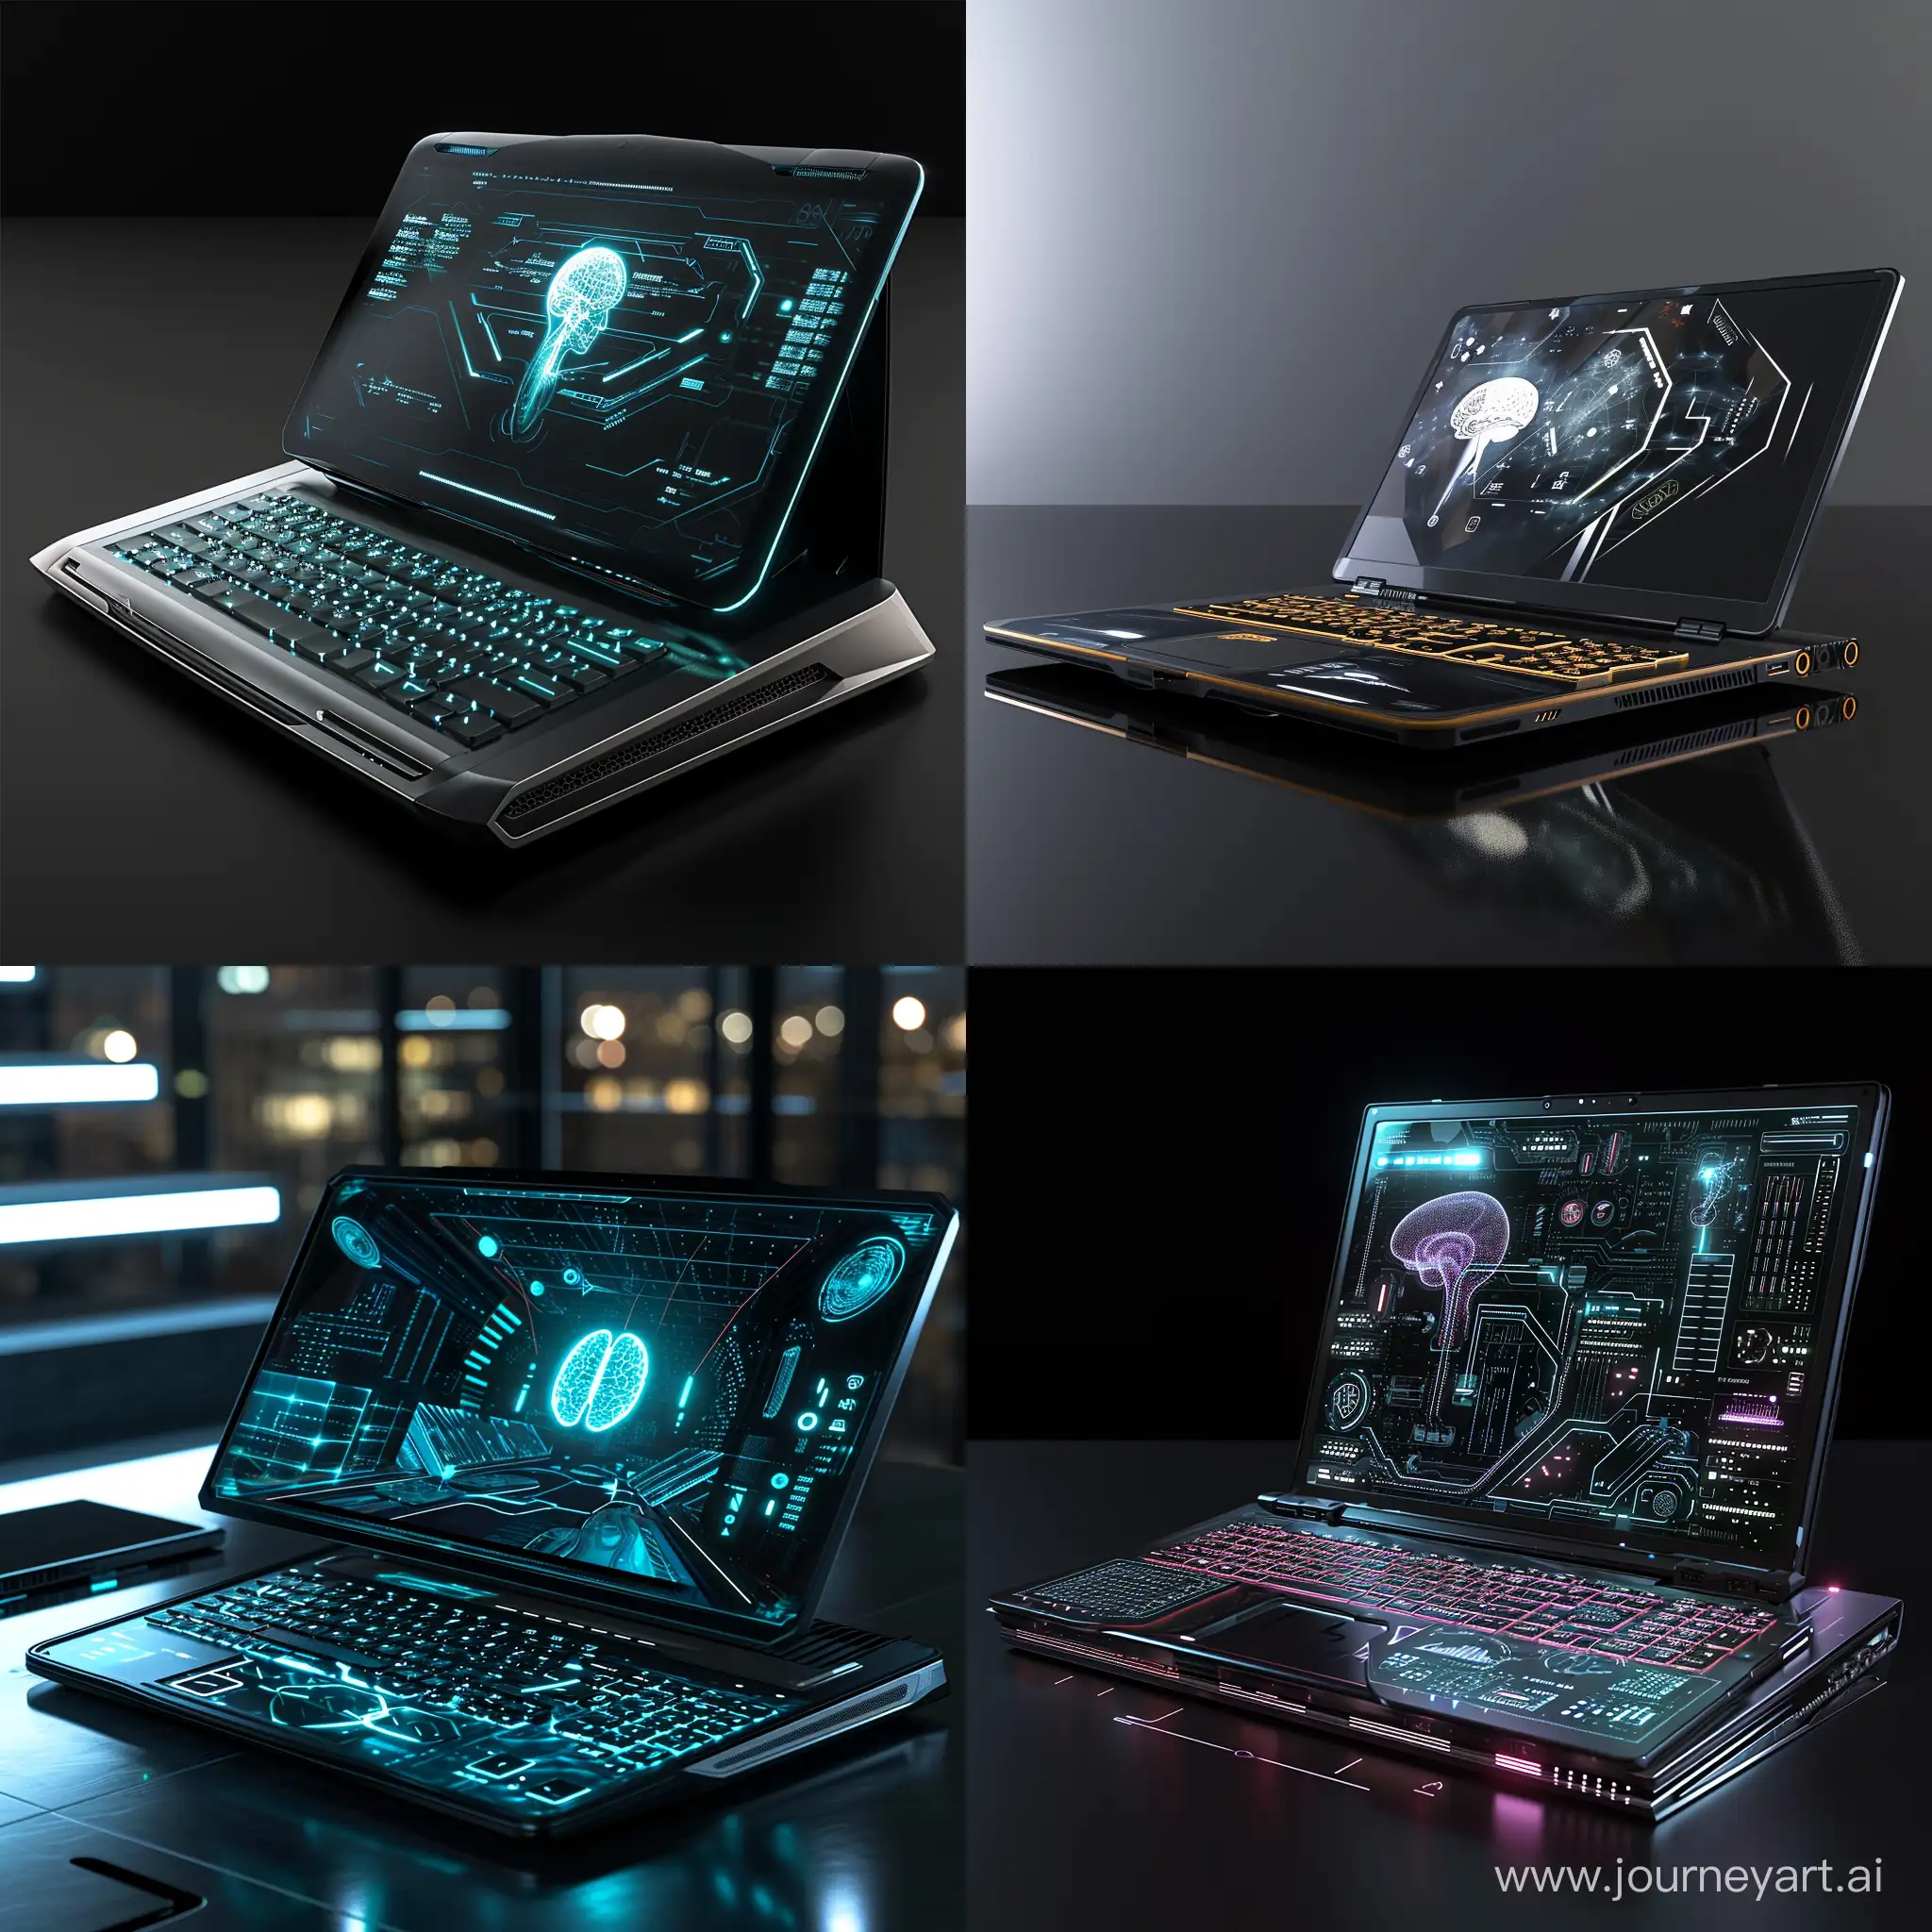 Futuristic laptop, flexible display, holographic keyboard, augmented reality integration, brain-computer interface, quantum processing unit, self-healing materials, wireless charging and power sharing, emotion recognition and response, advanced security features, modular design --v 6